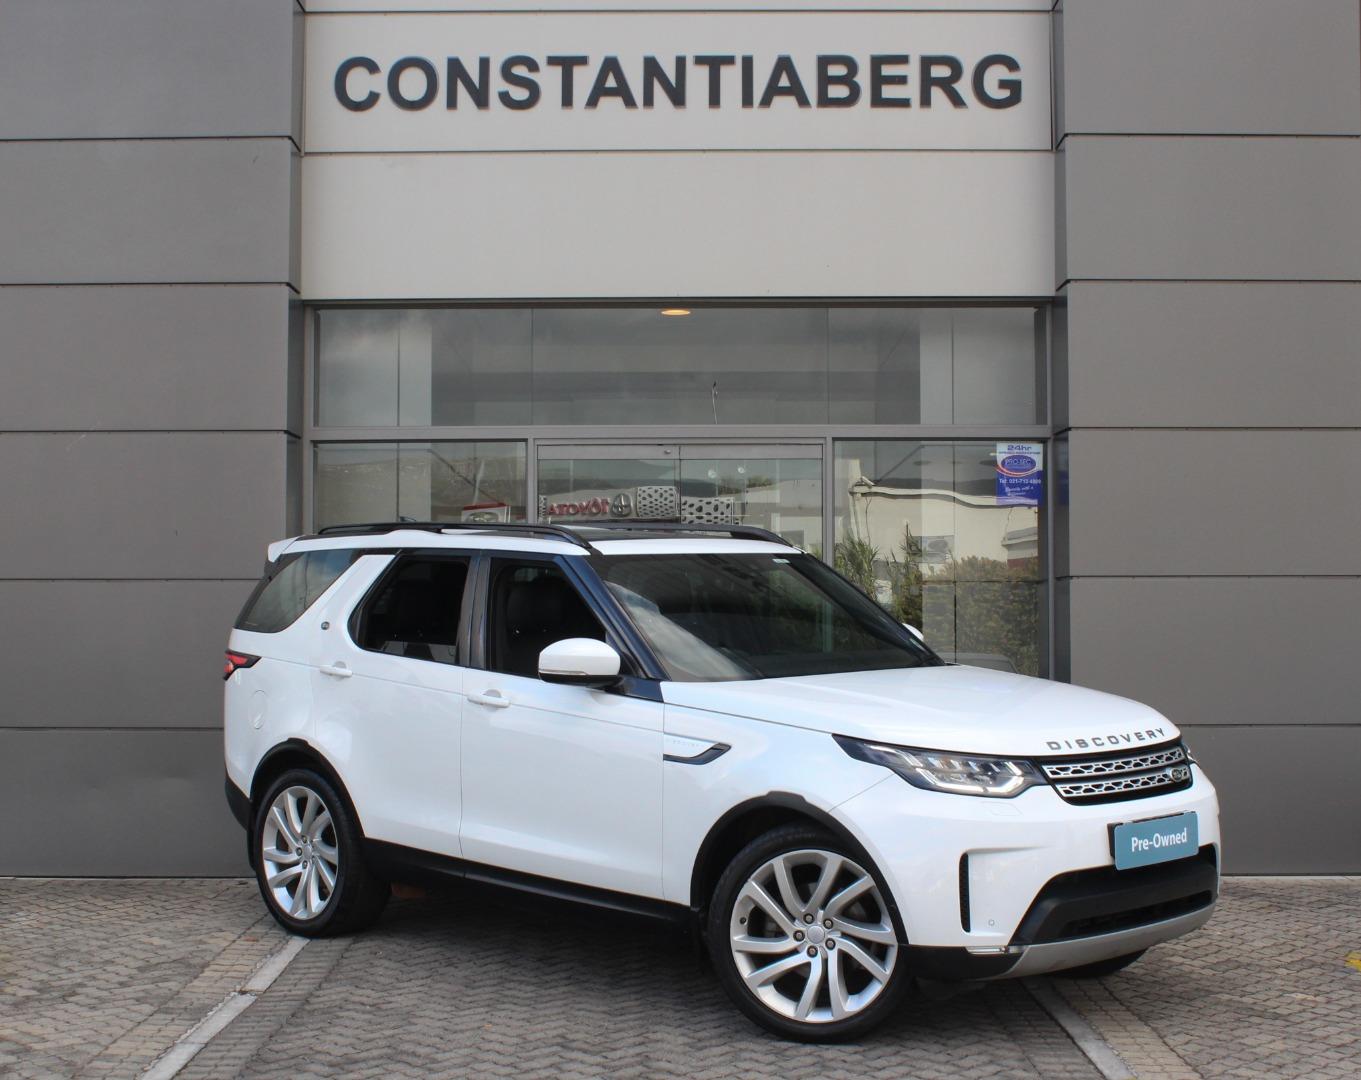 2019 Land Rover Discovery  for sale - 222255